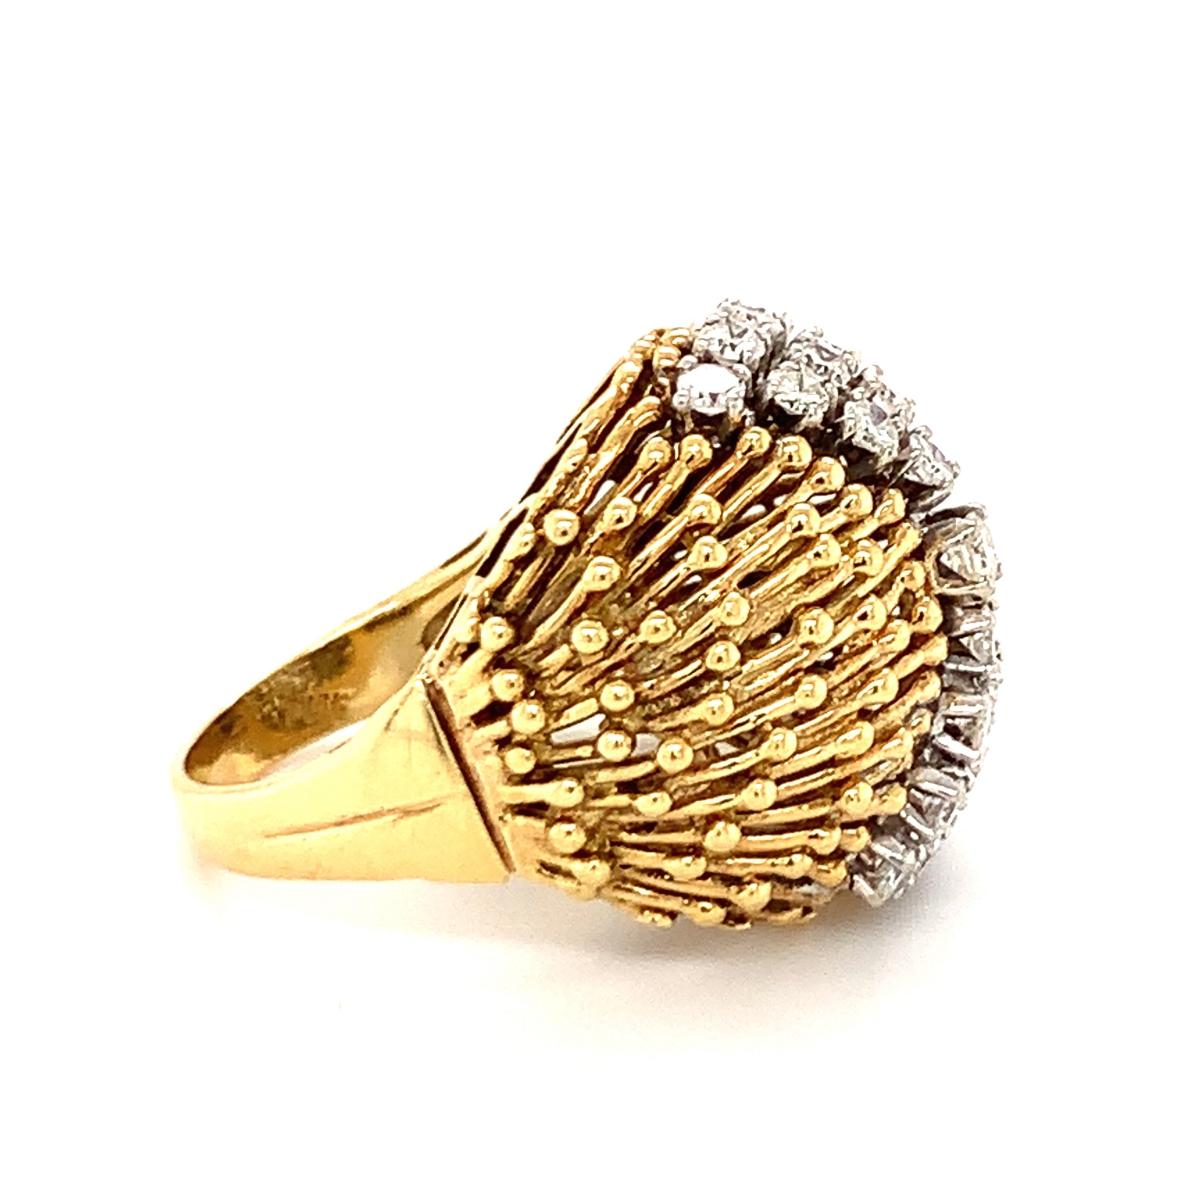 Diamond Dome 18K Yellow Gold Ring, circa 1960s For Sale 2